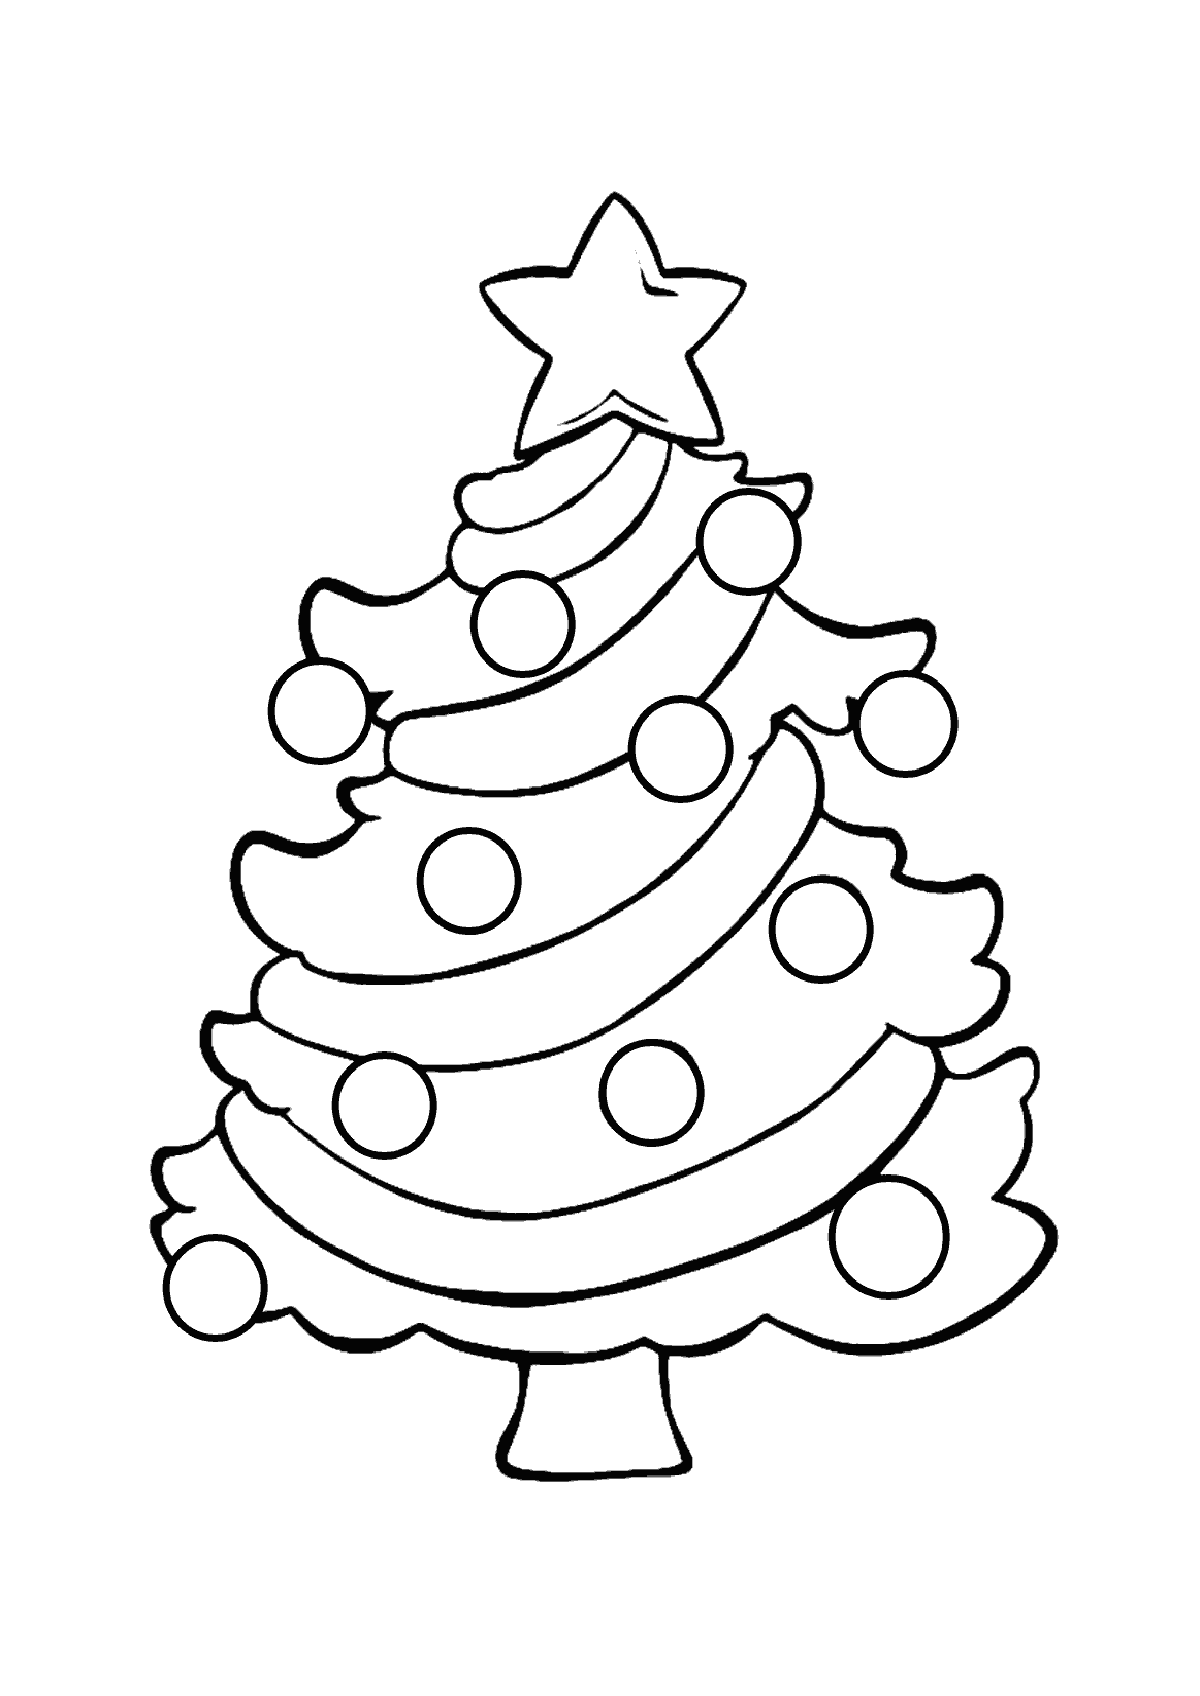 free-printable-christmas-tree-coloring-pages-for-kids